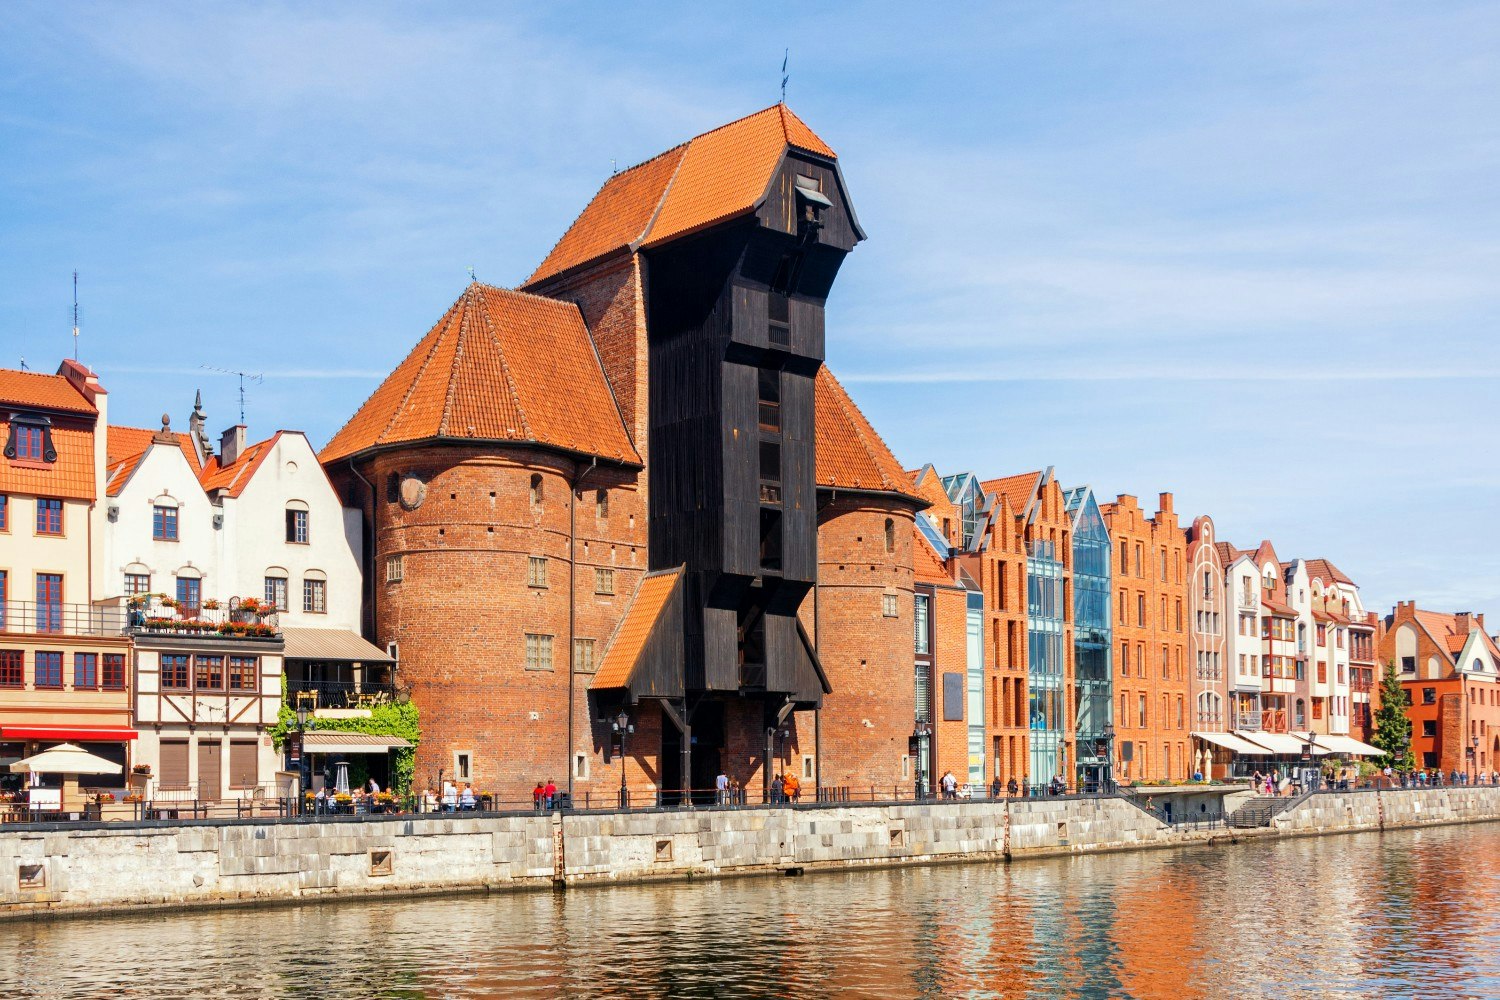 Scenic view of the riverside with medieval Port Crane (Zuraw) and historic buildings on the embankment of the Motlawa River, Gdansk, Poland.